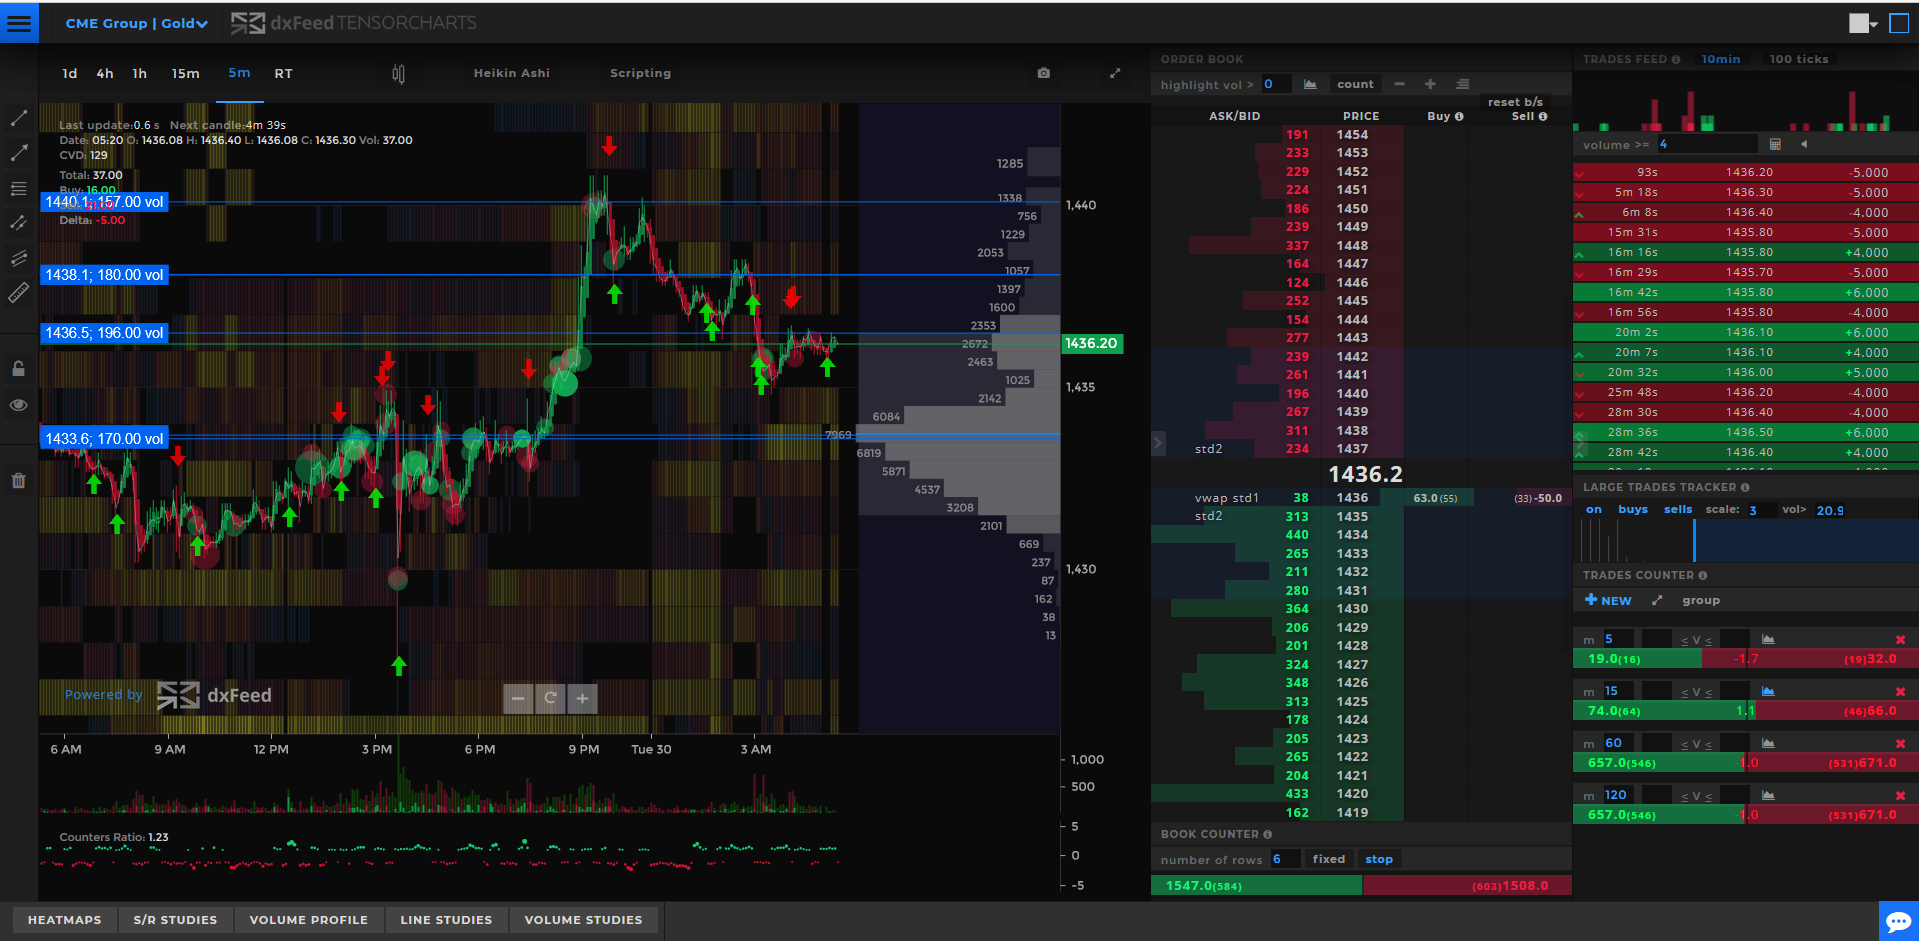 Tensorcharts. DXFEED. Volume Counter. Tensorchart Liqudations.